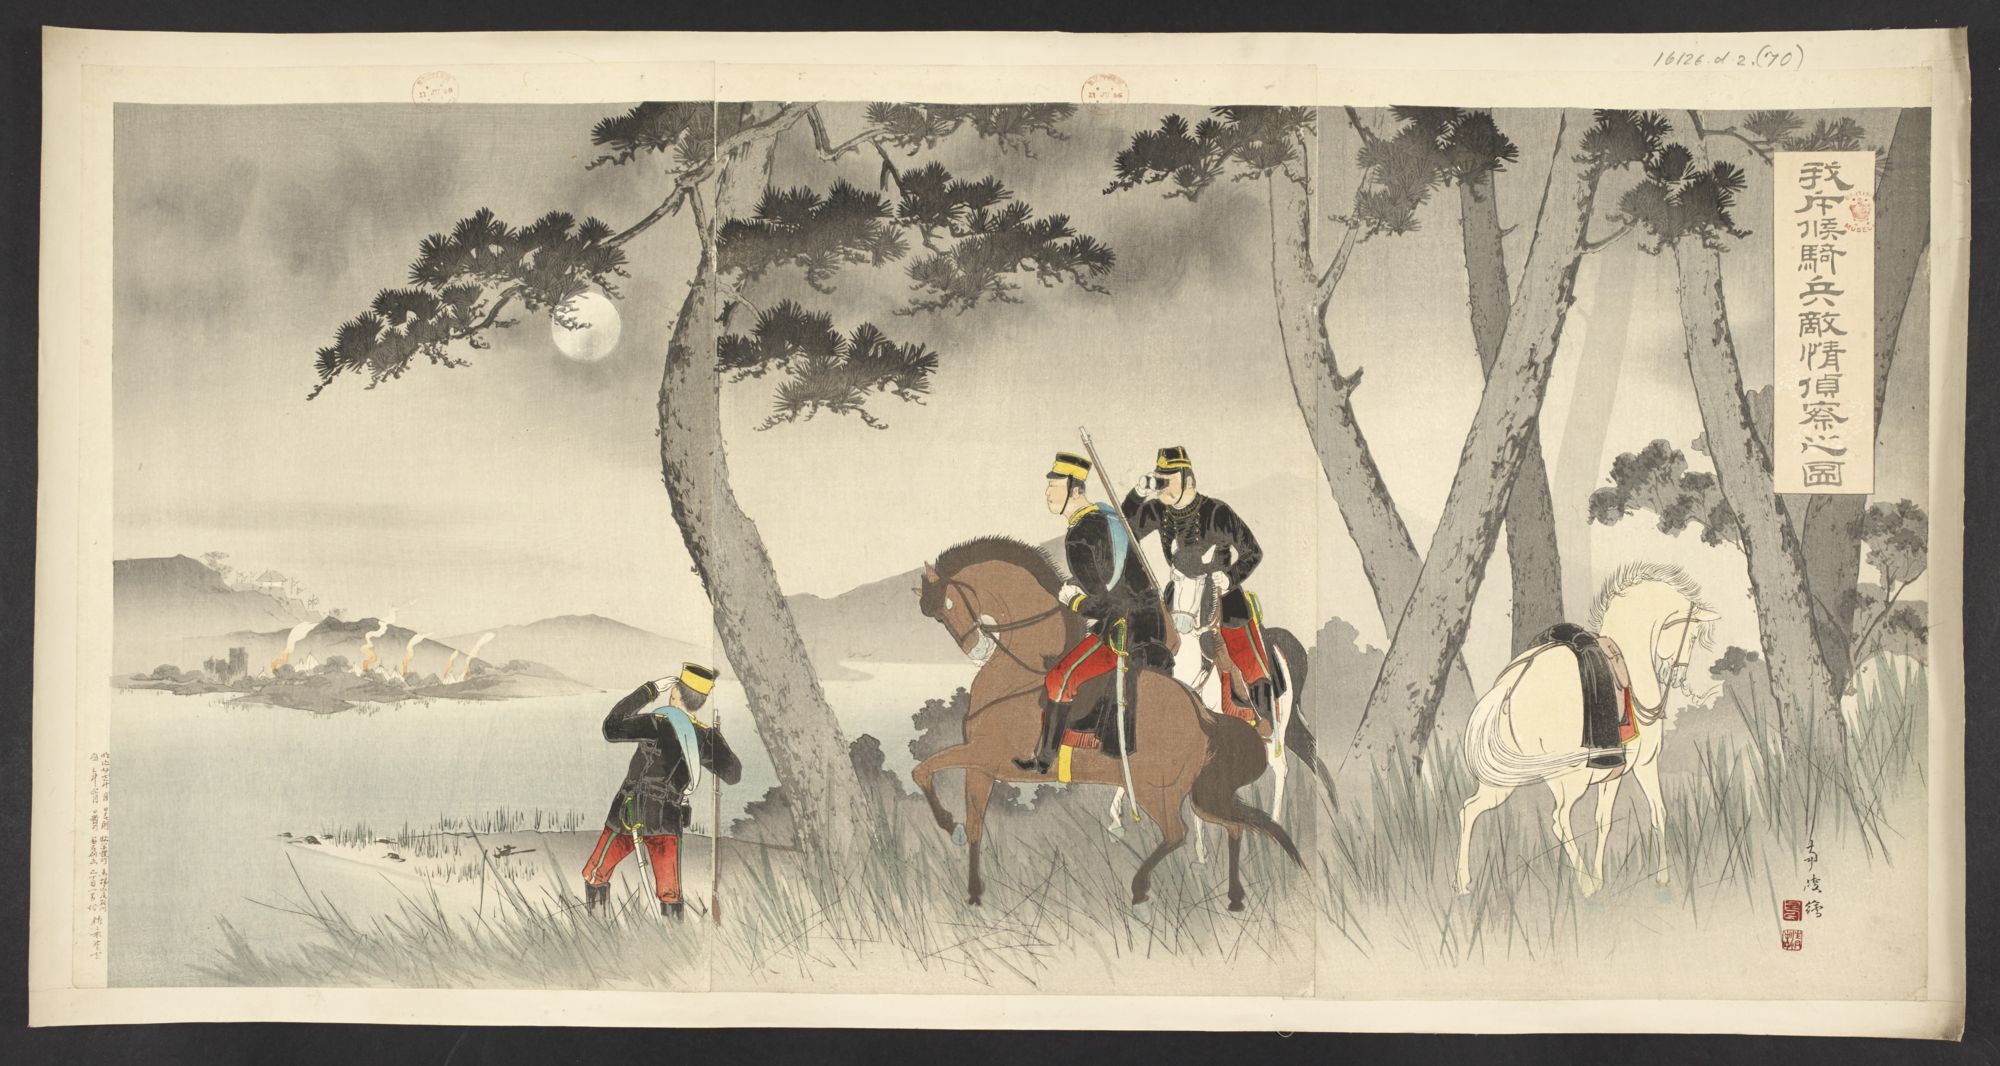 Gallery | The Sino-Japanese War of 1894-1895 ： as seen in prints 